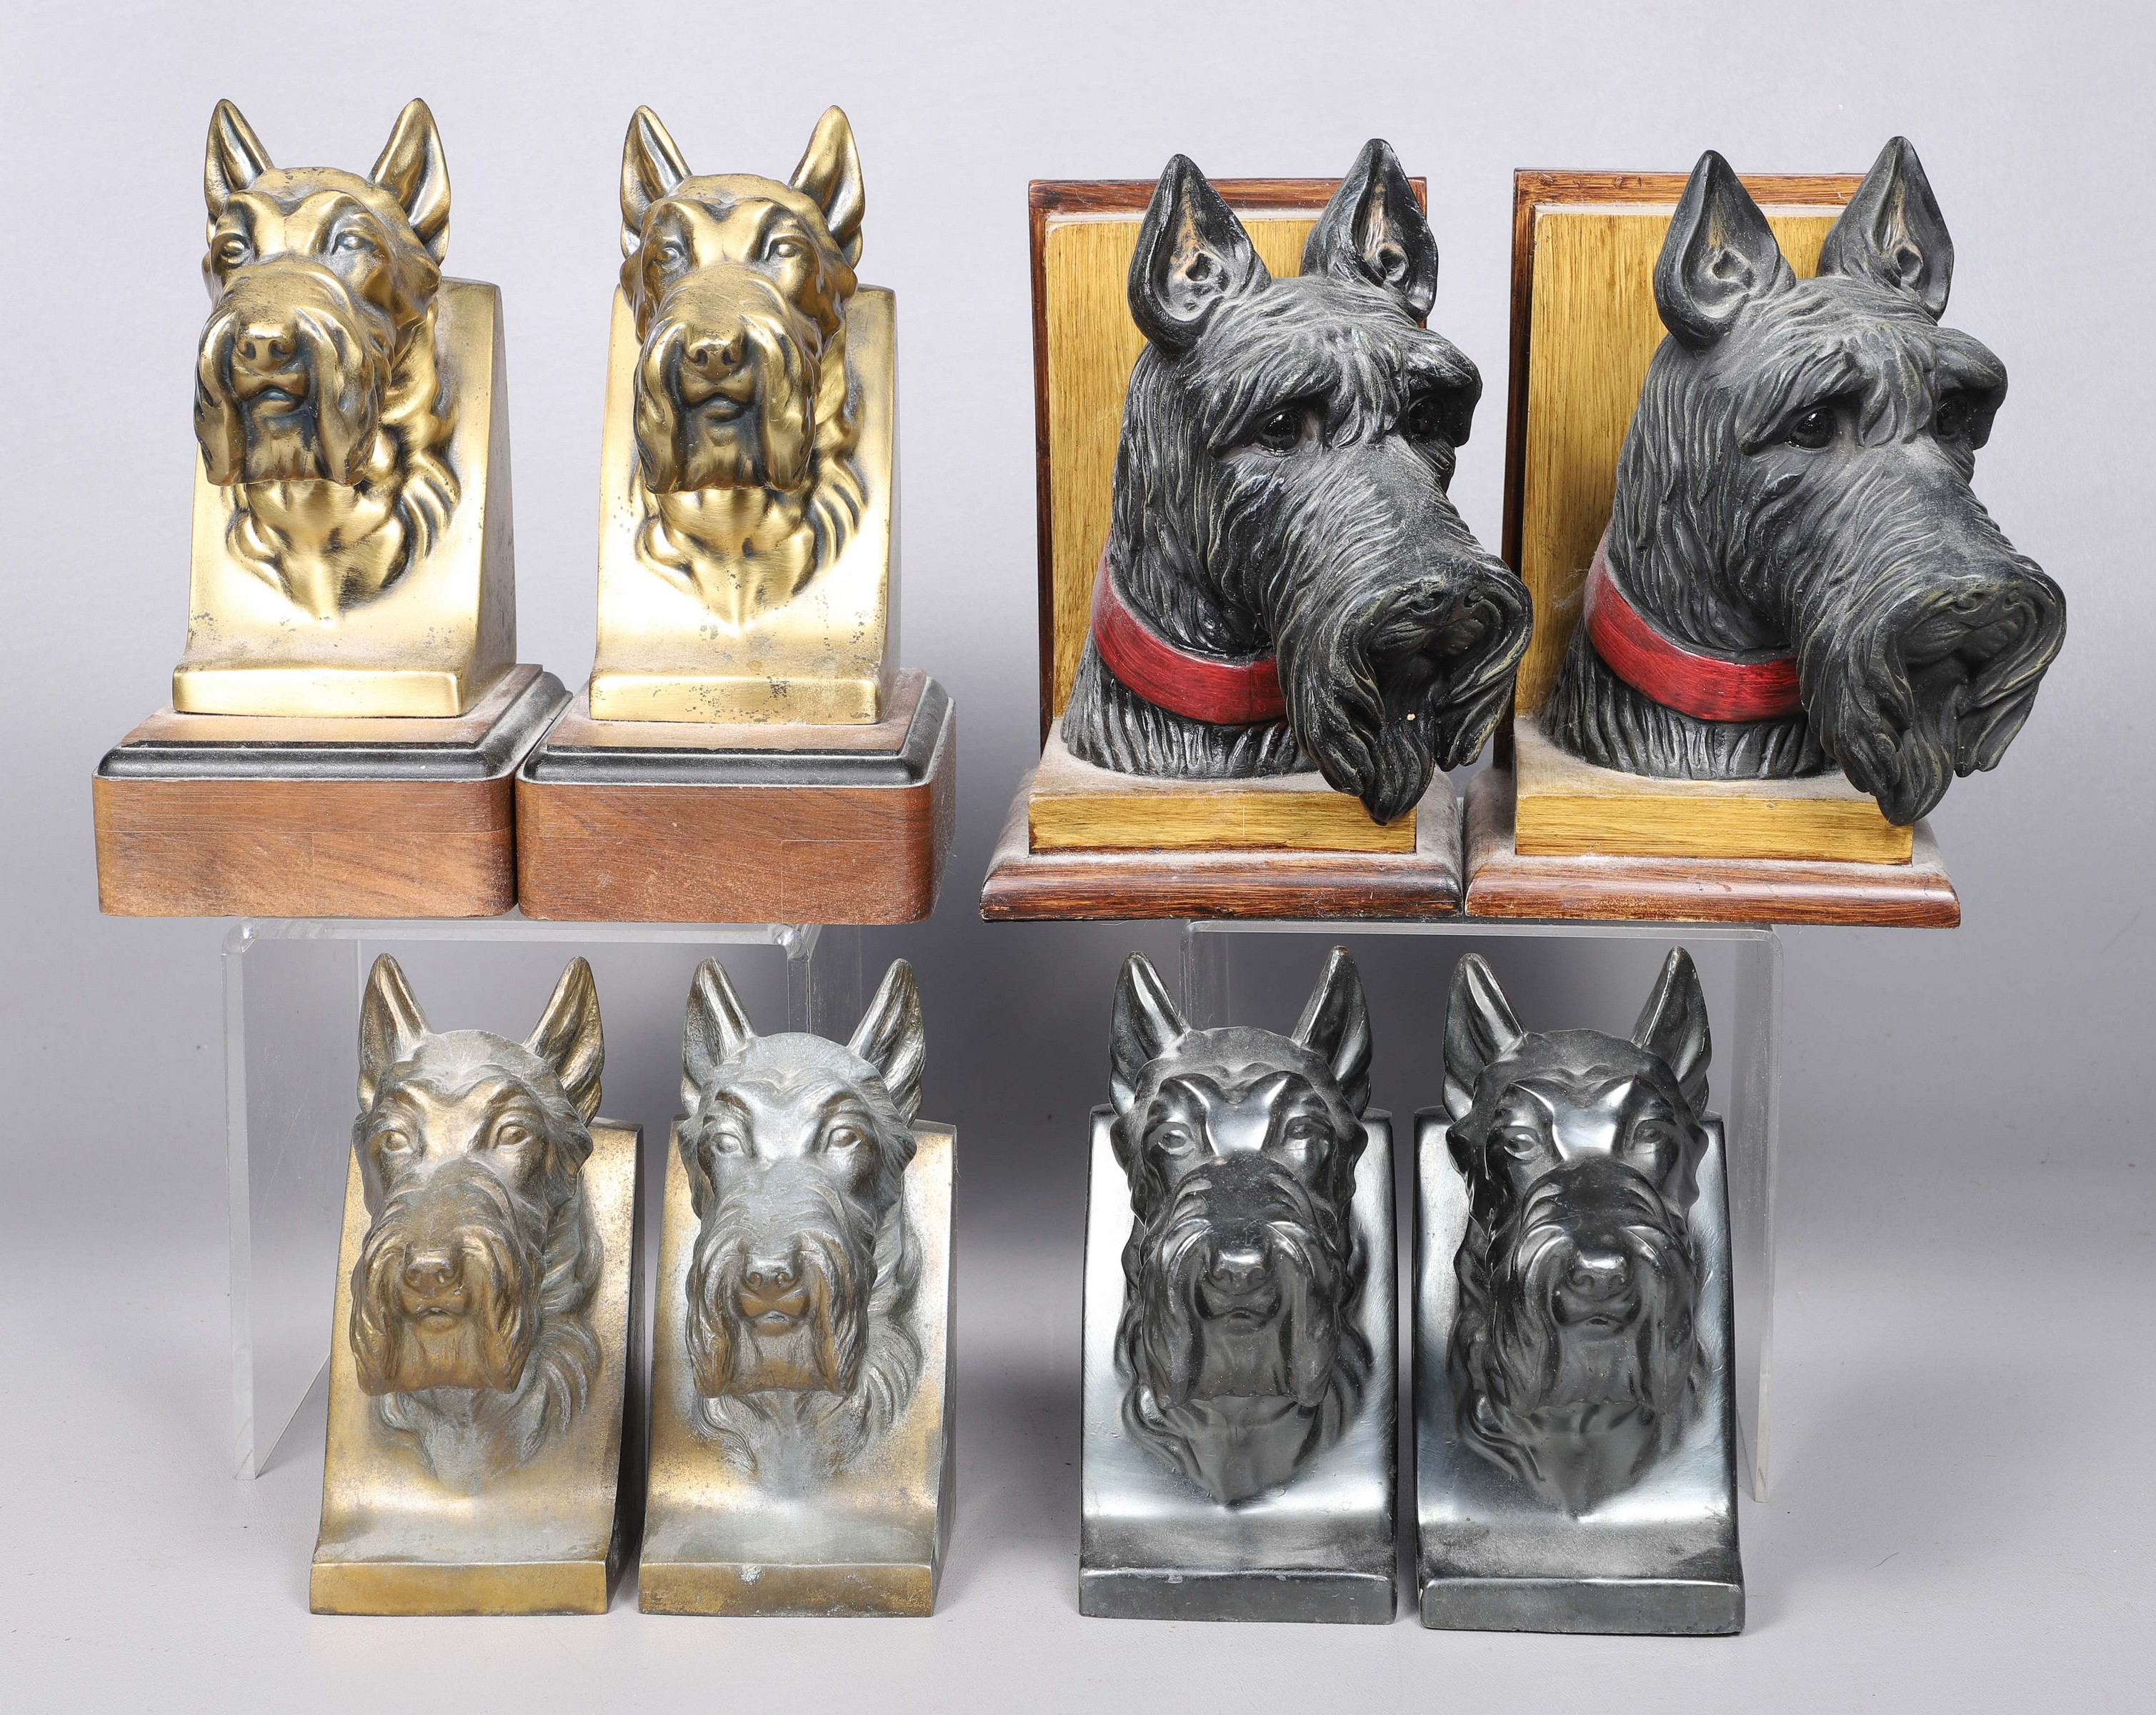  4 Pair of large Scottish Terrier 2e185a